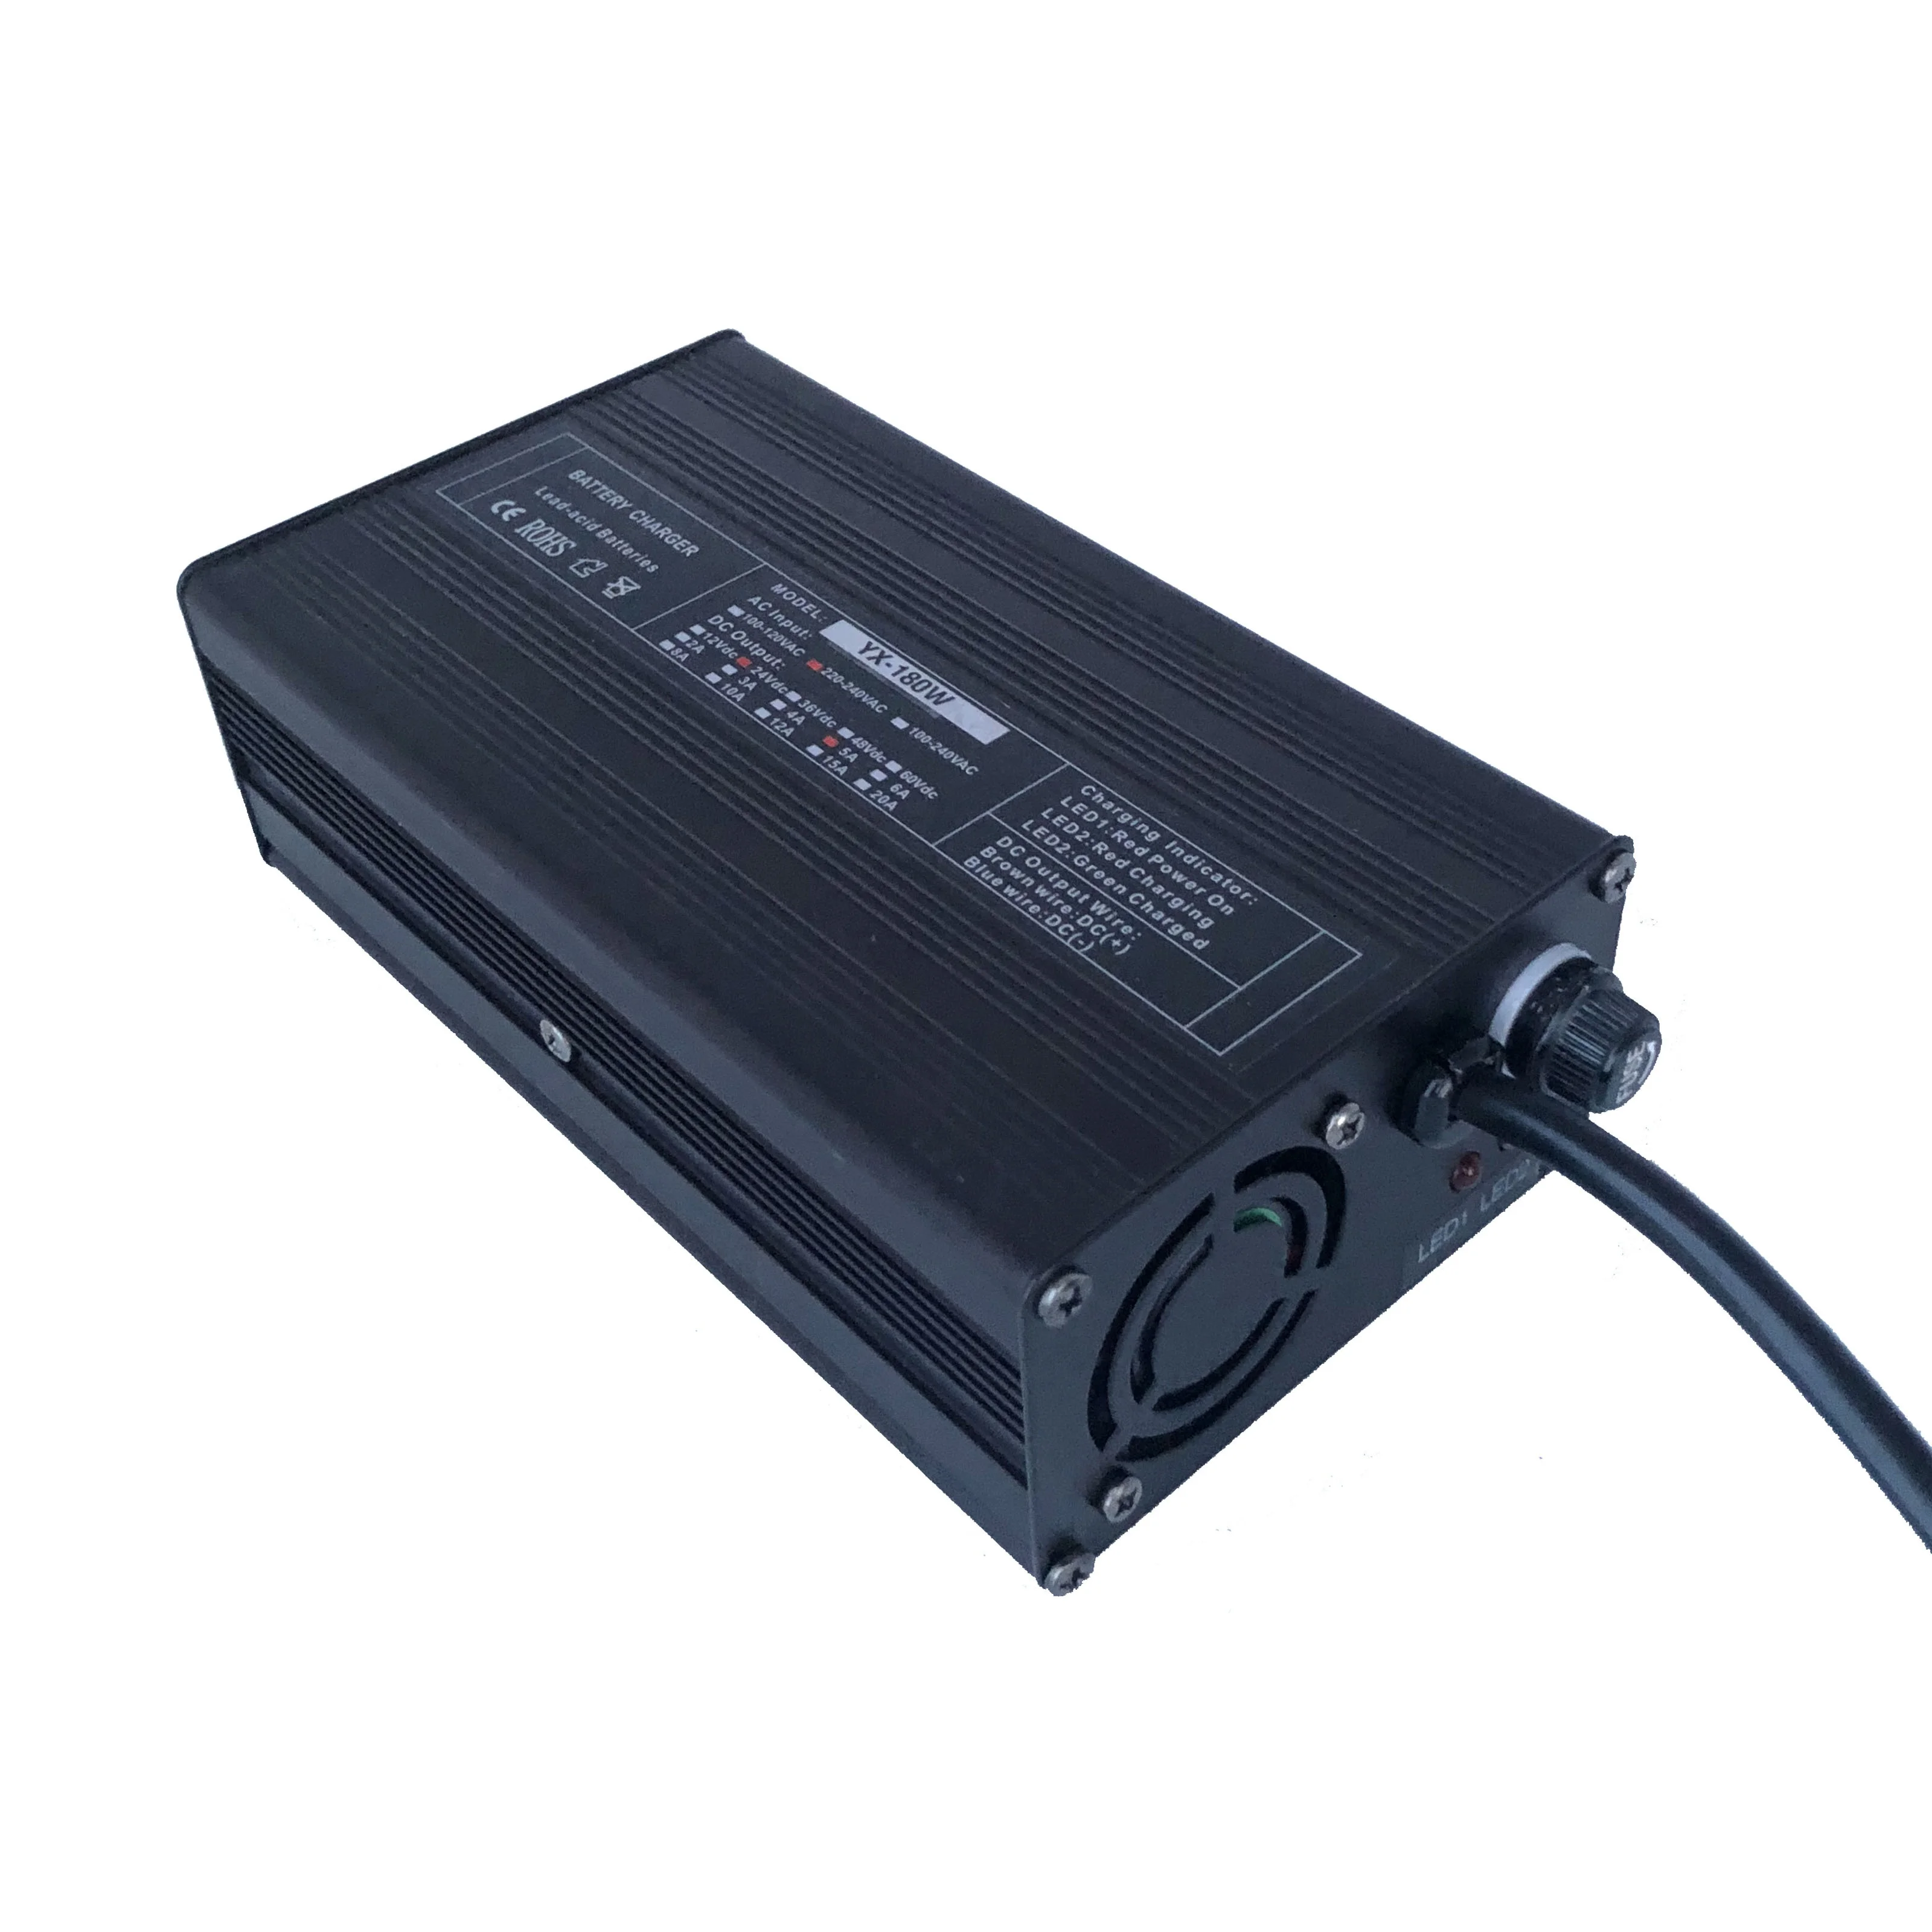 

48 volt charger 48v 54.6v 3a 13s battery charger for lifepo4 lipo/lithium li ion batteries